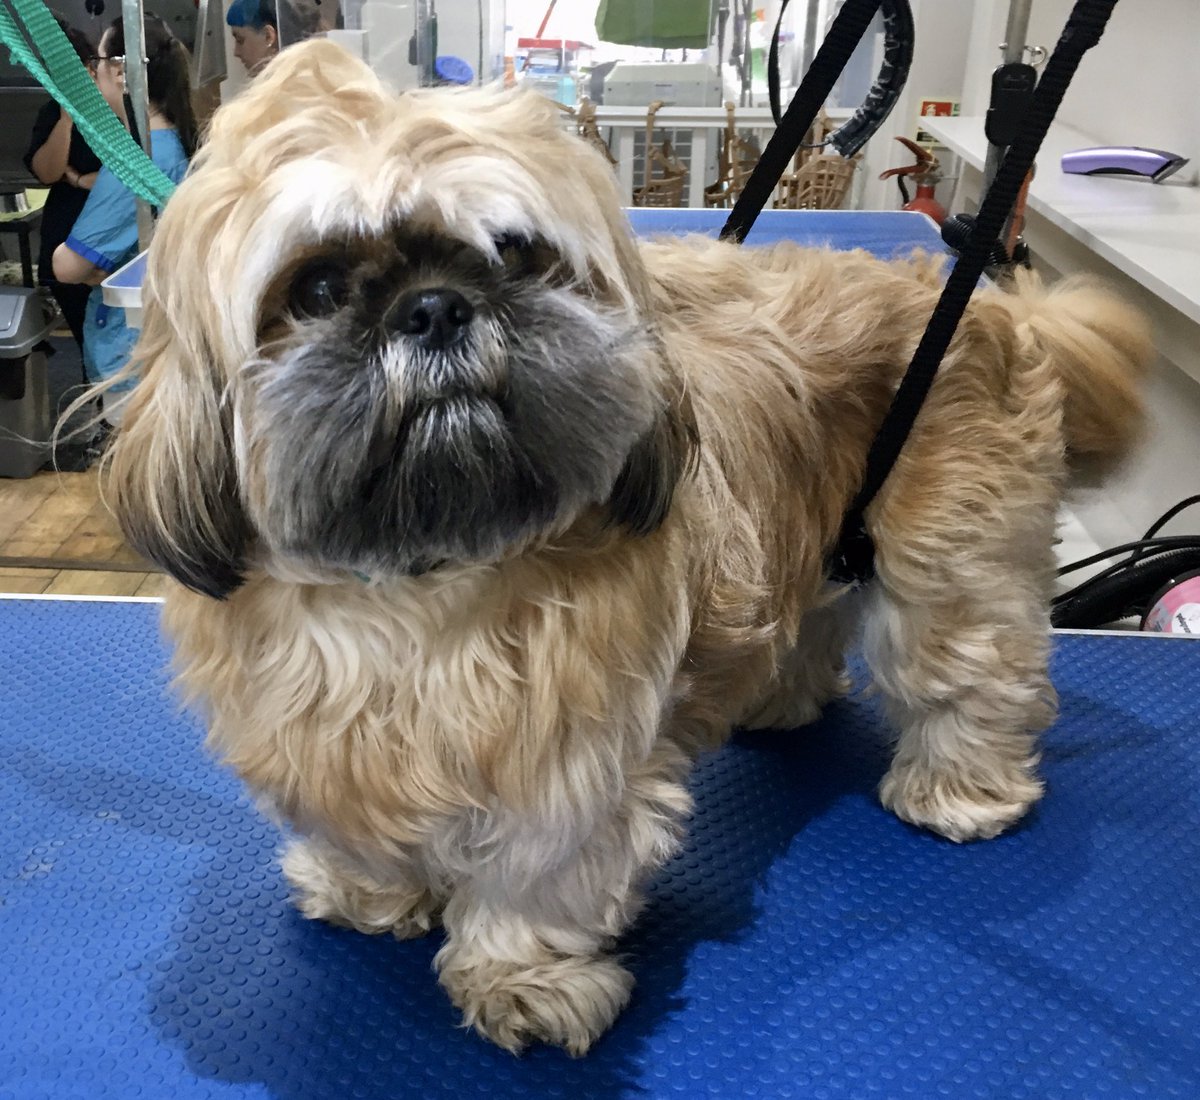 Vanity Fur 😍

Shih Tzu - Boo.
Full Groom and Scissor Tidy. Legs scissored into tubes and clipping and styling around the neck to enhance and define between body and head 🐶✂️

#greenwich #greenwichdog #dogsofgreenwich #doggroomer #doggroom #doggrooming #petstylist